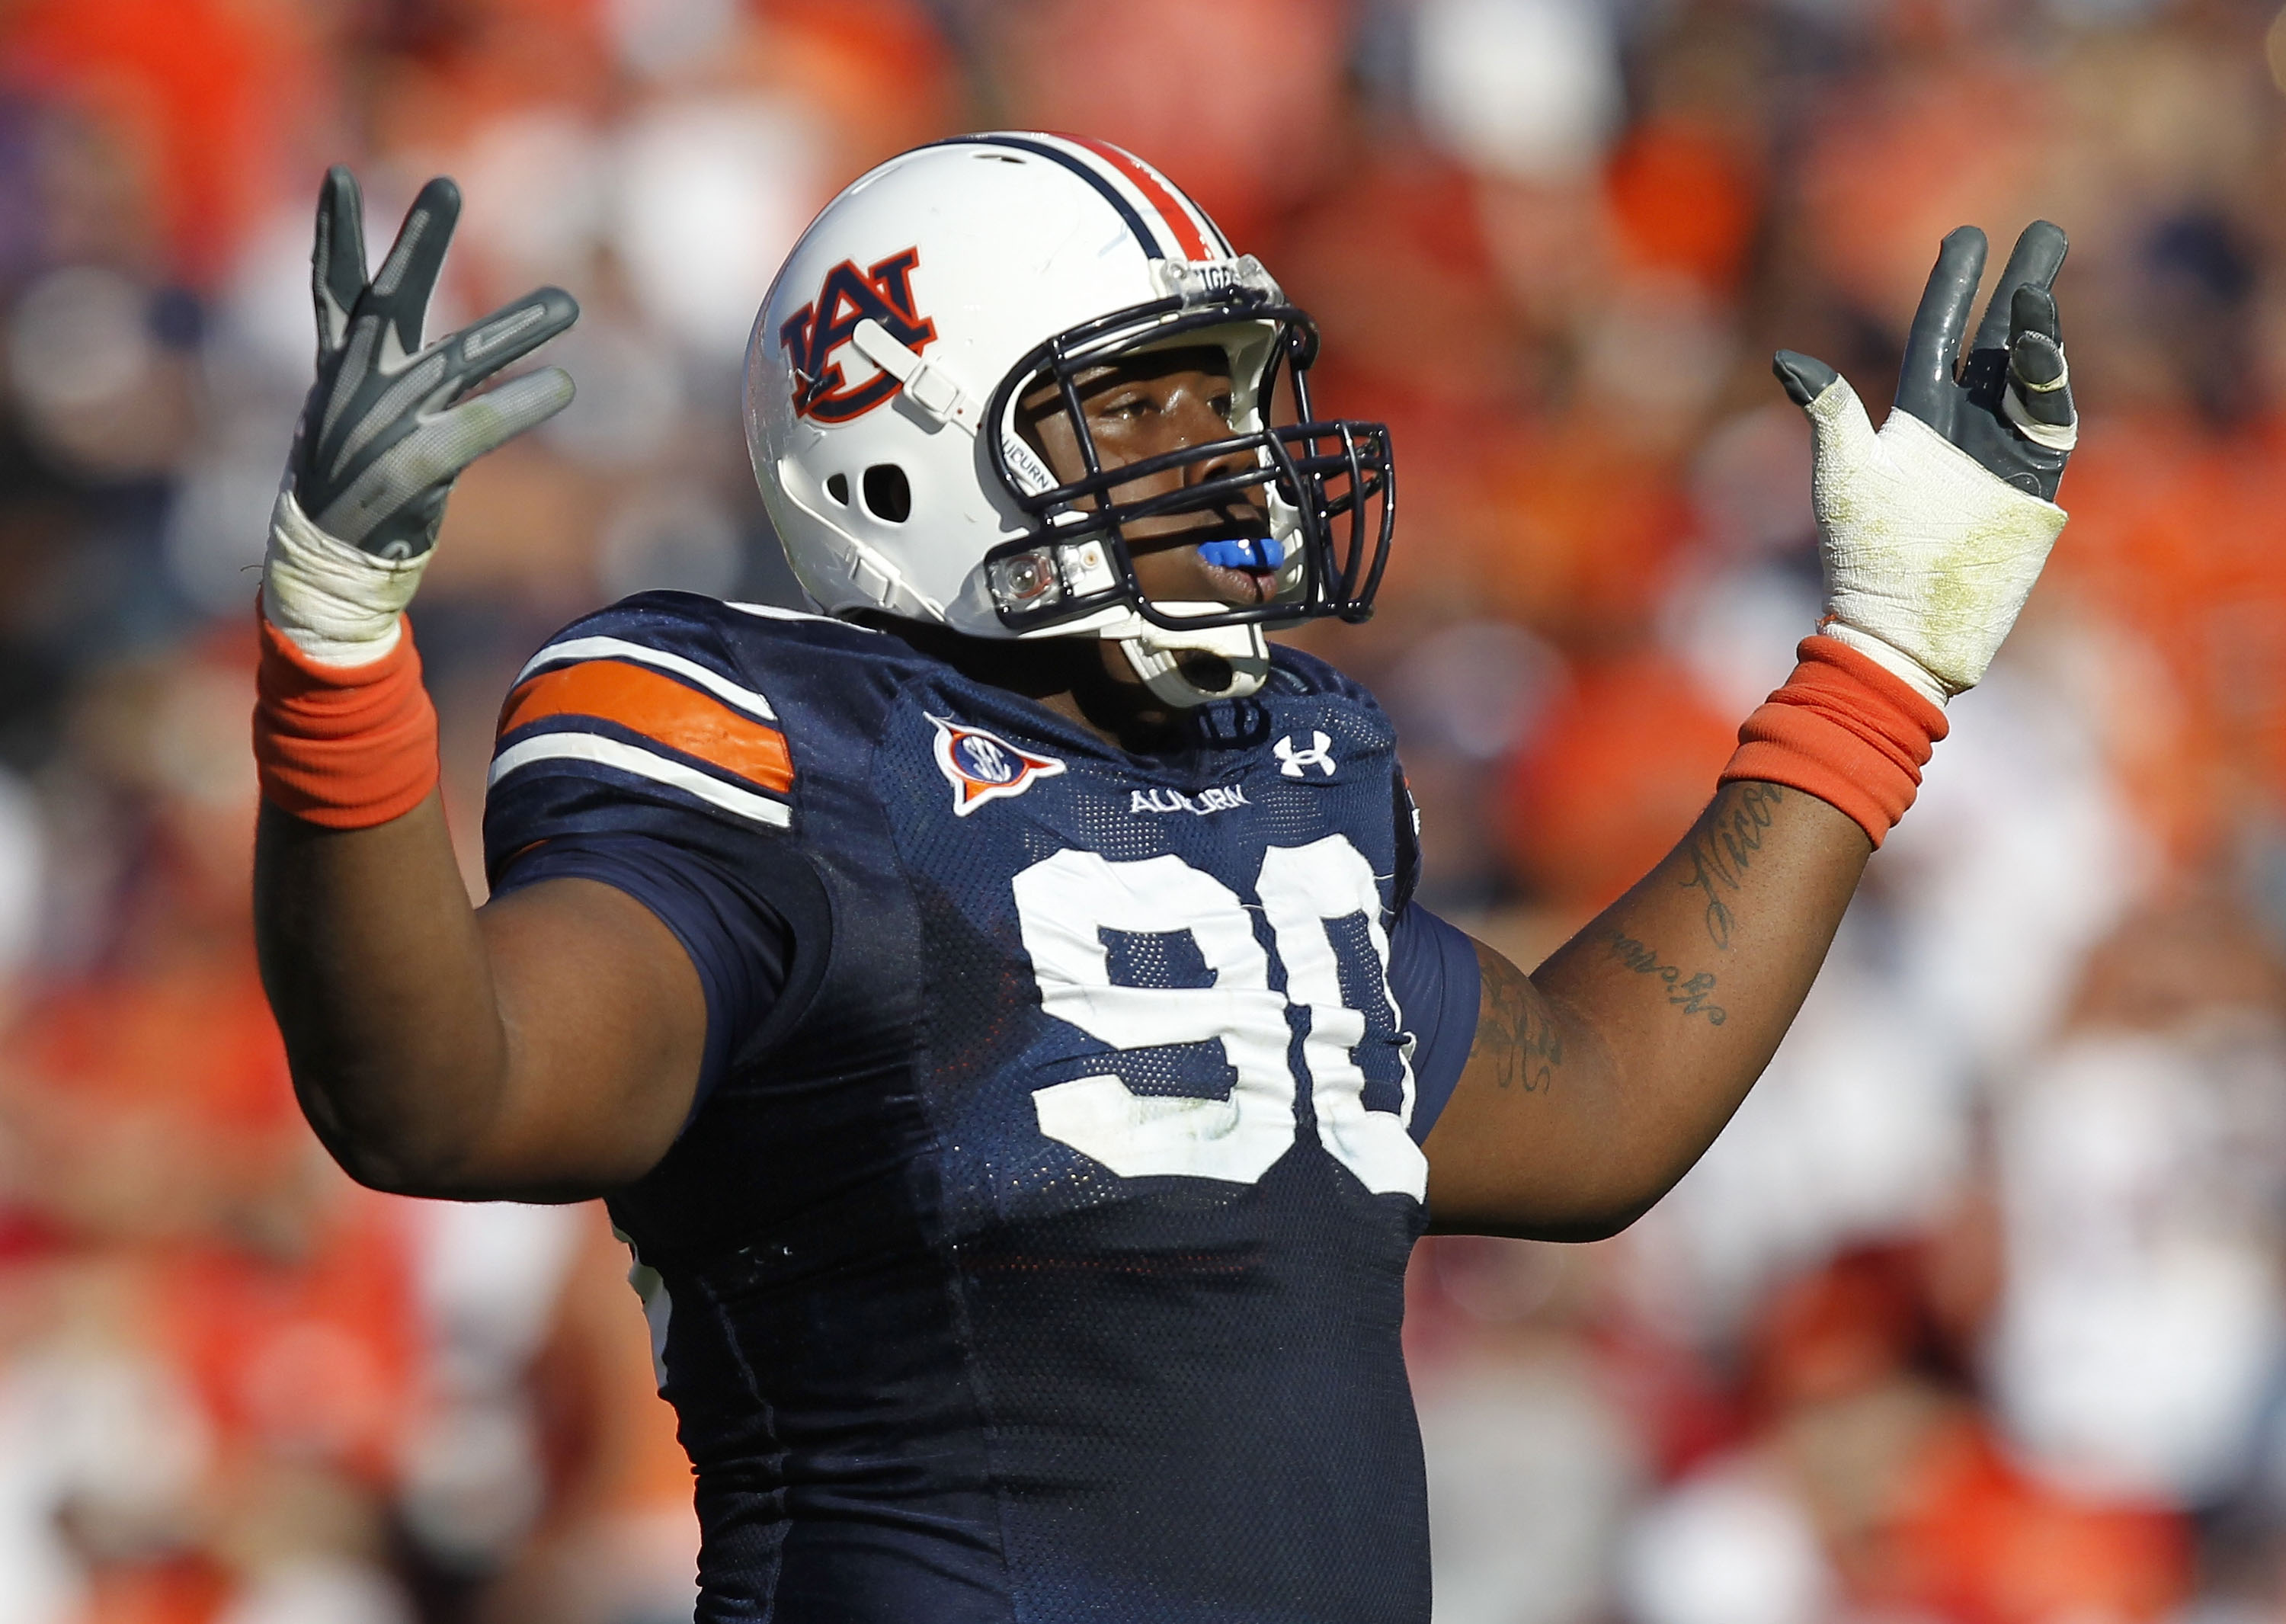 AUBURN, AL - OCTOBER 16:  Defensive lineman Nick Fairley #90 of the Auburn Tigers celebrates a play during the game against the Arkansas Razorbacks at Jordan-Hare Stadium on October 16, 2010 in Auburn, Alabama.  (Photo by Mike Zarrilli/Getty Images)